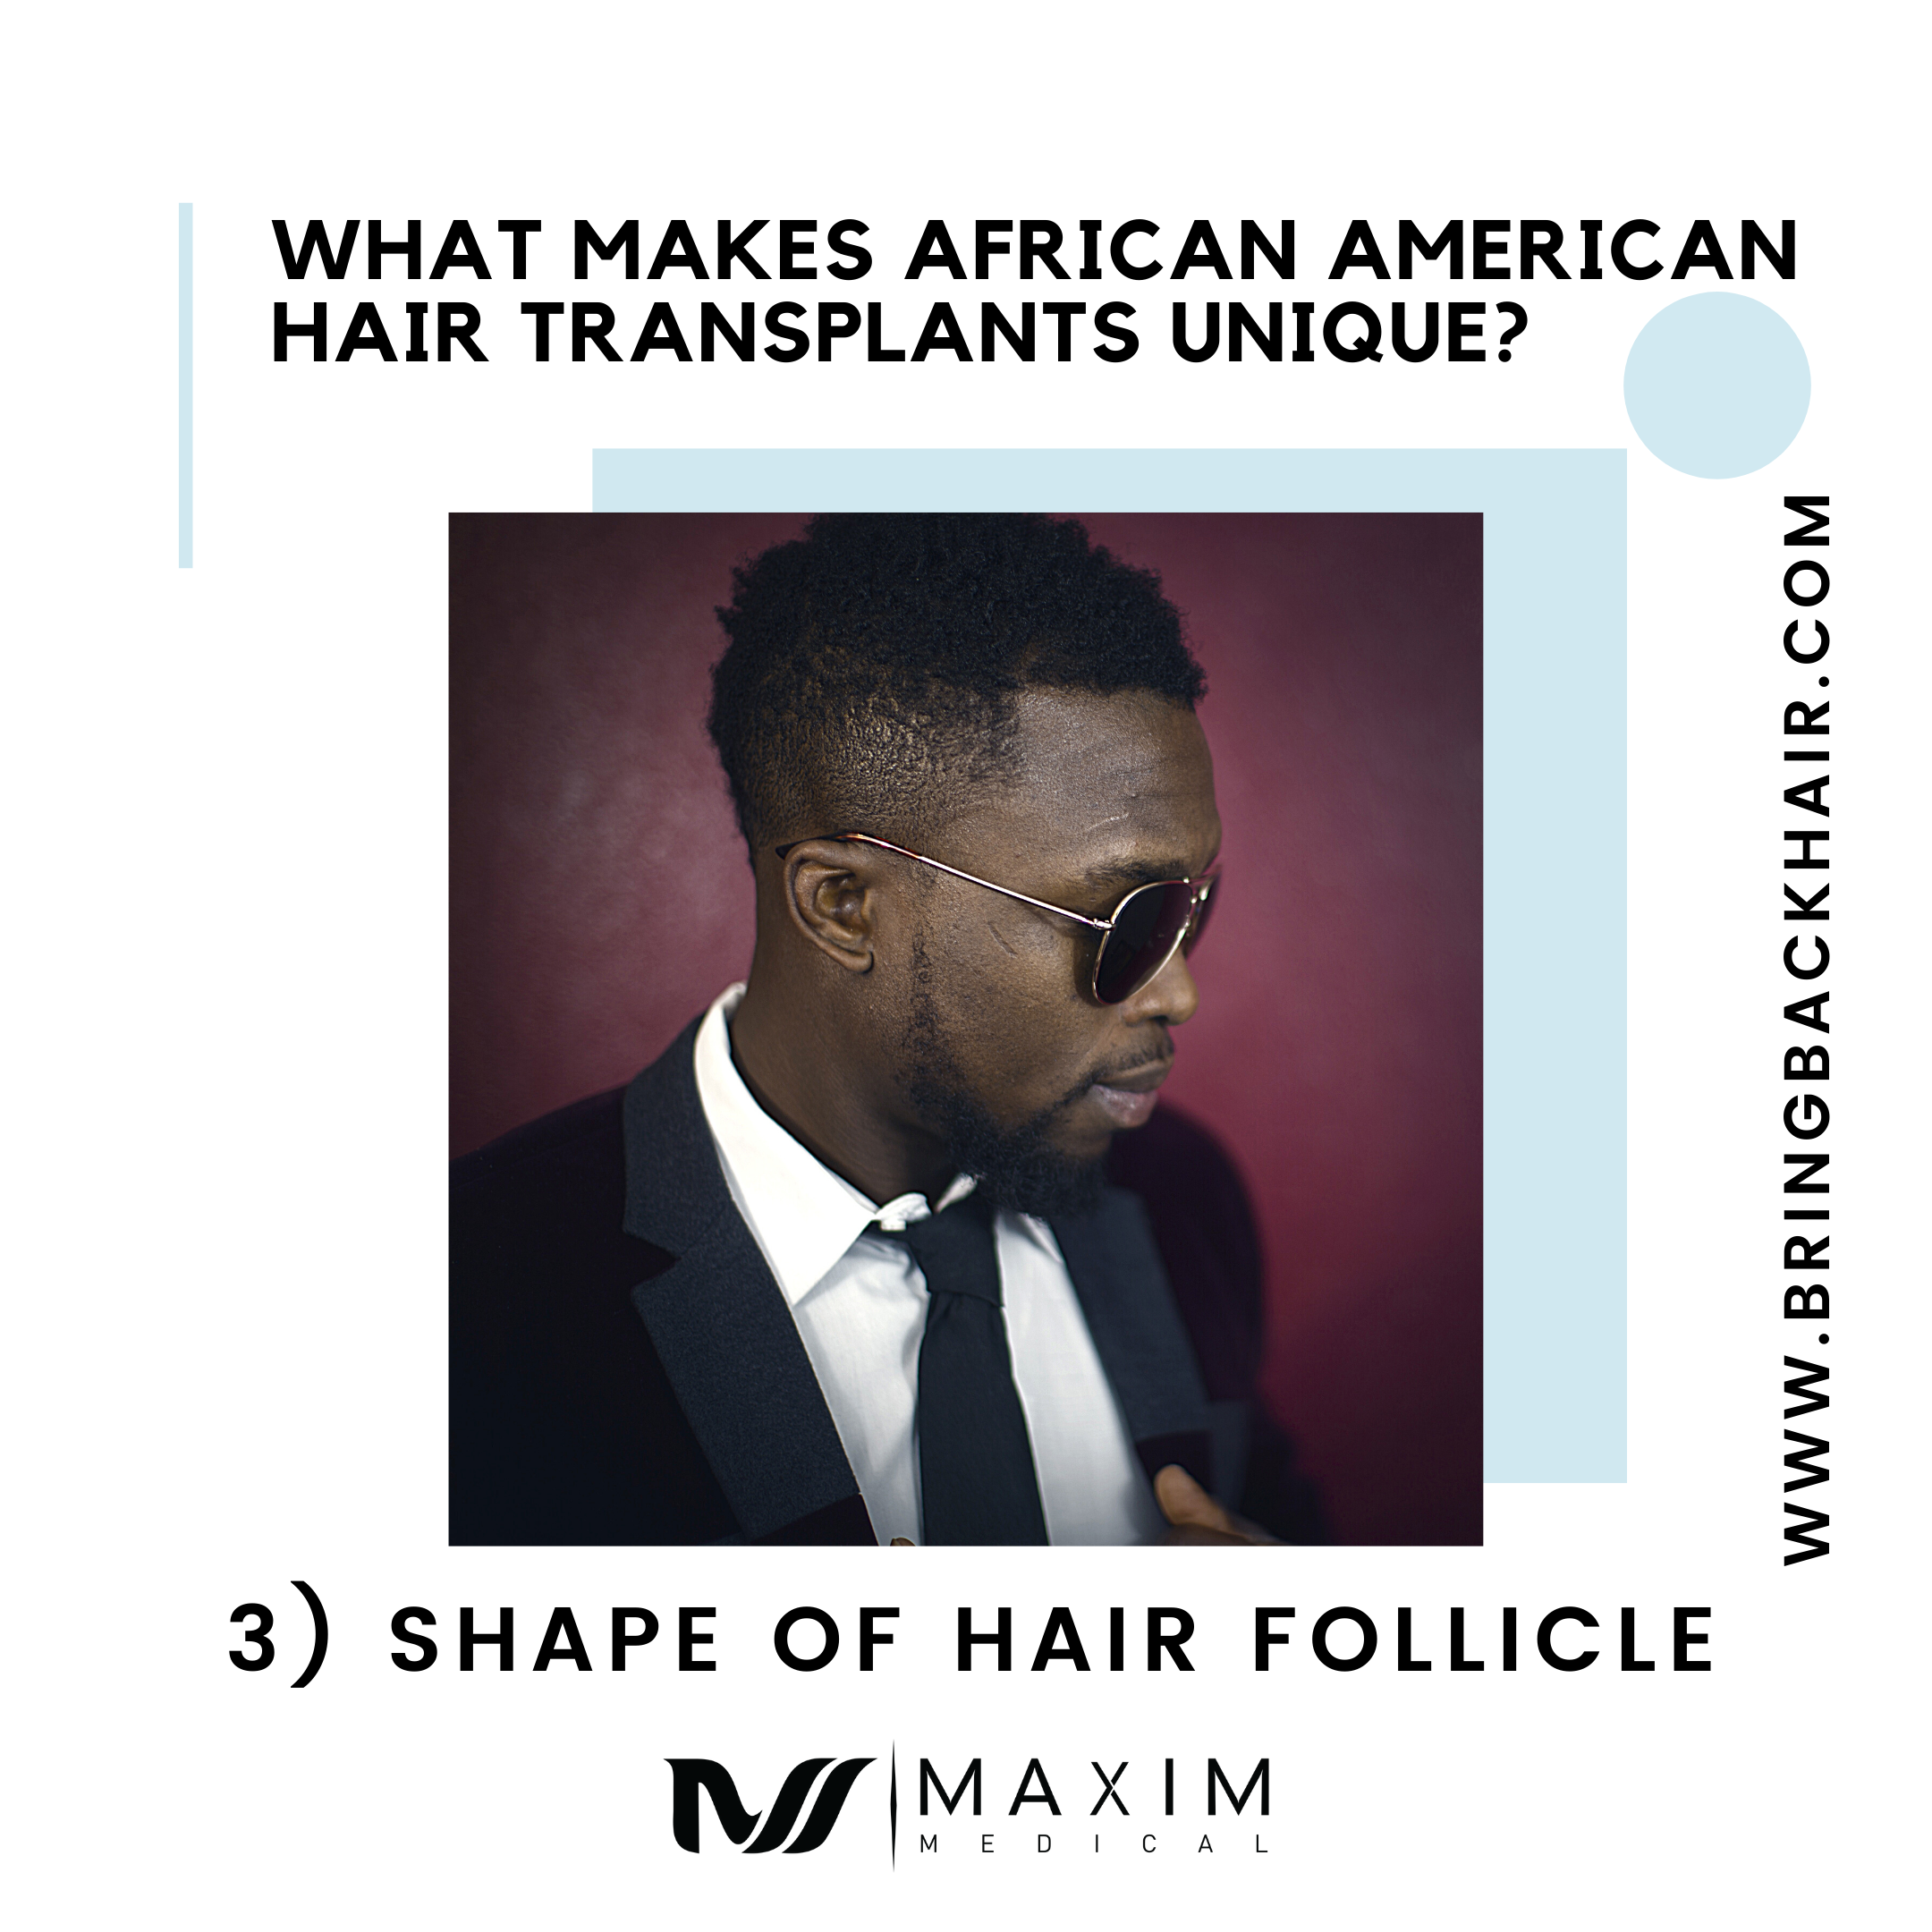 3. Shape of Hair Follicle

Though African American hair is technically less dense than other types of hair, it can appear to be thicker and more dense. This is due to the natural C-shaped curl of each follicle. This can actually serve to be an advantage for the patient when it comes to receiving a hair transplant as less hair from the donor area will be needed to be harvested to obtain a full appearance.